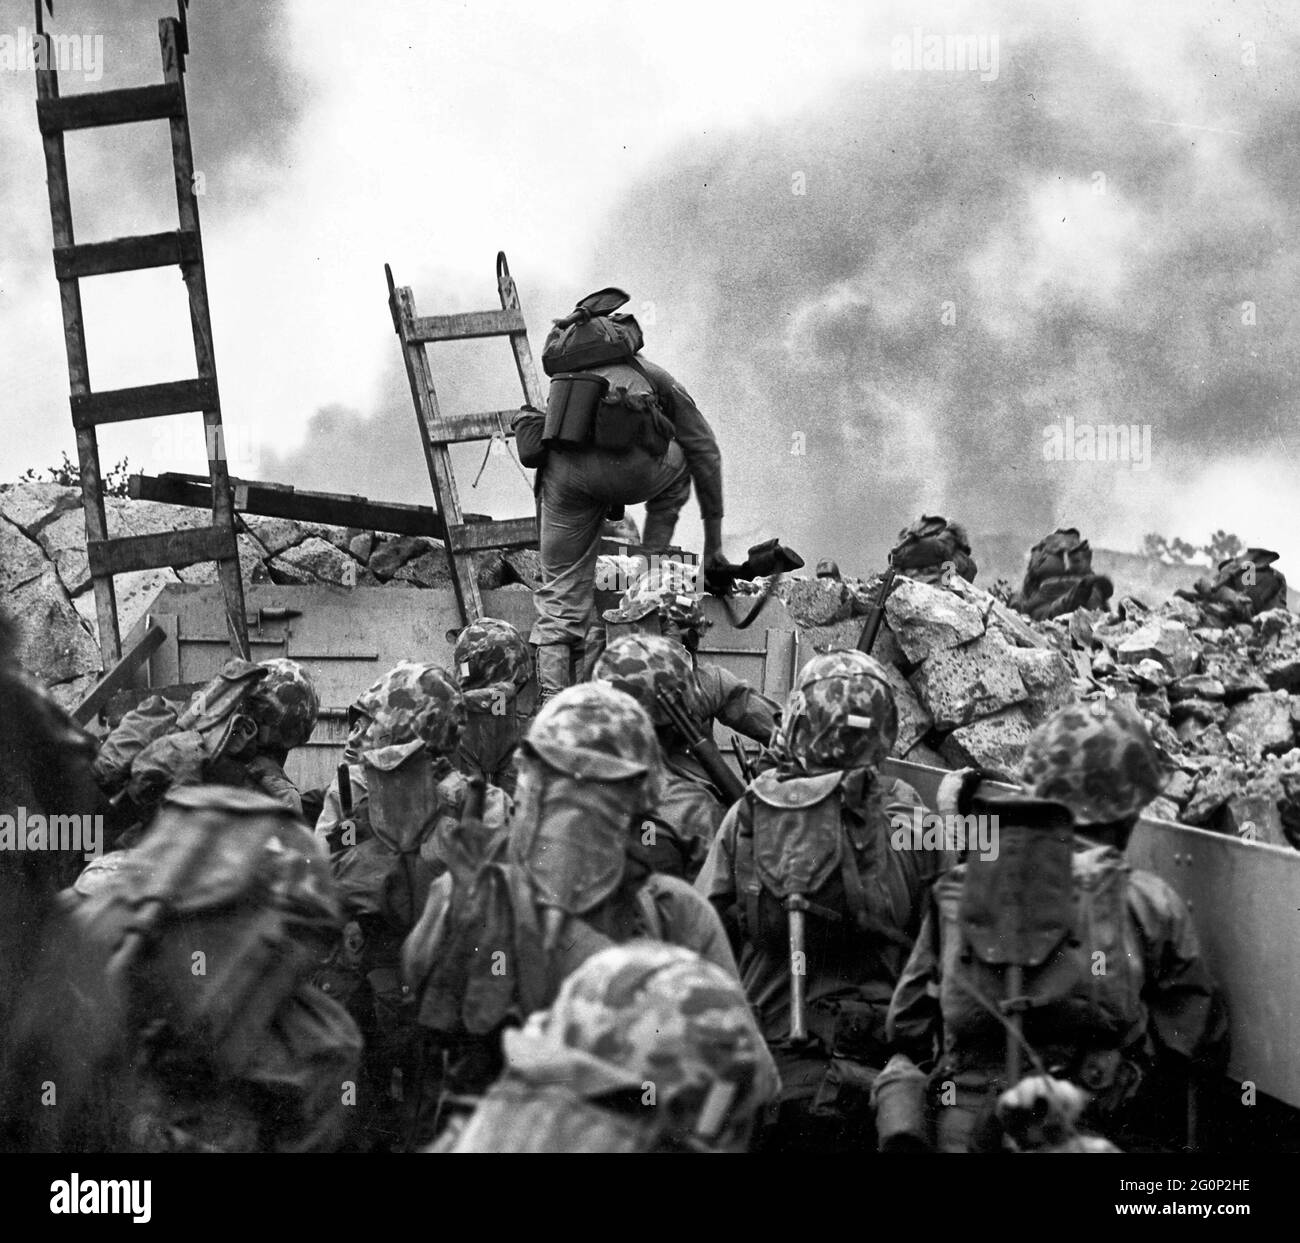 Leathernecks Use Scaling Ladders to Storm Ashore at Inchon in an Amphibious Invasion, September 15, 1950 Stock Photo